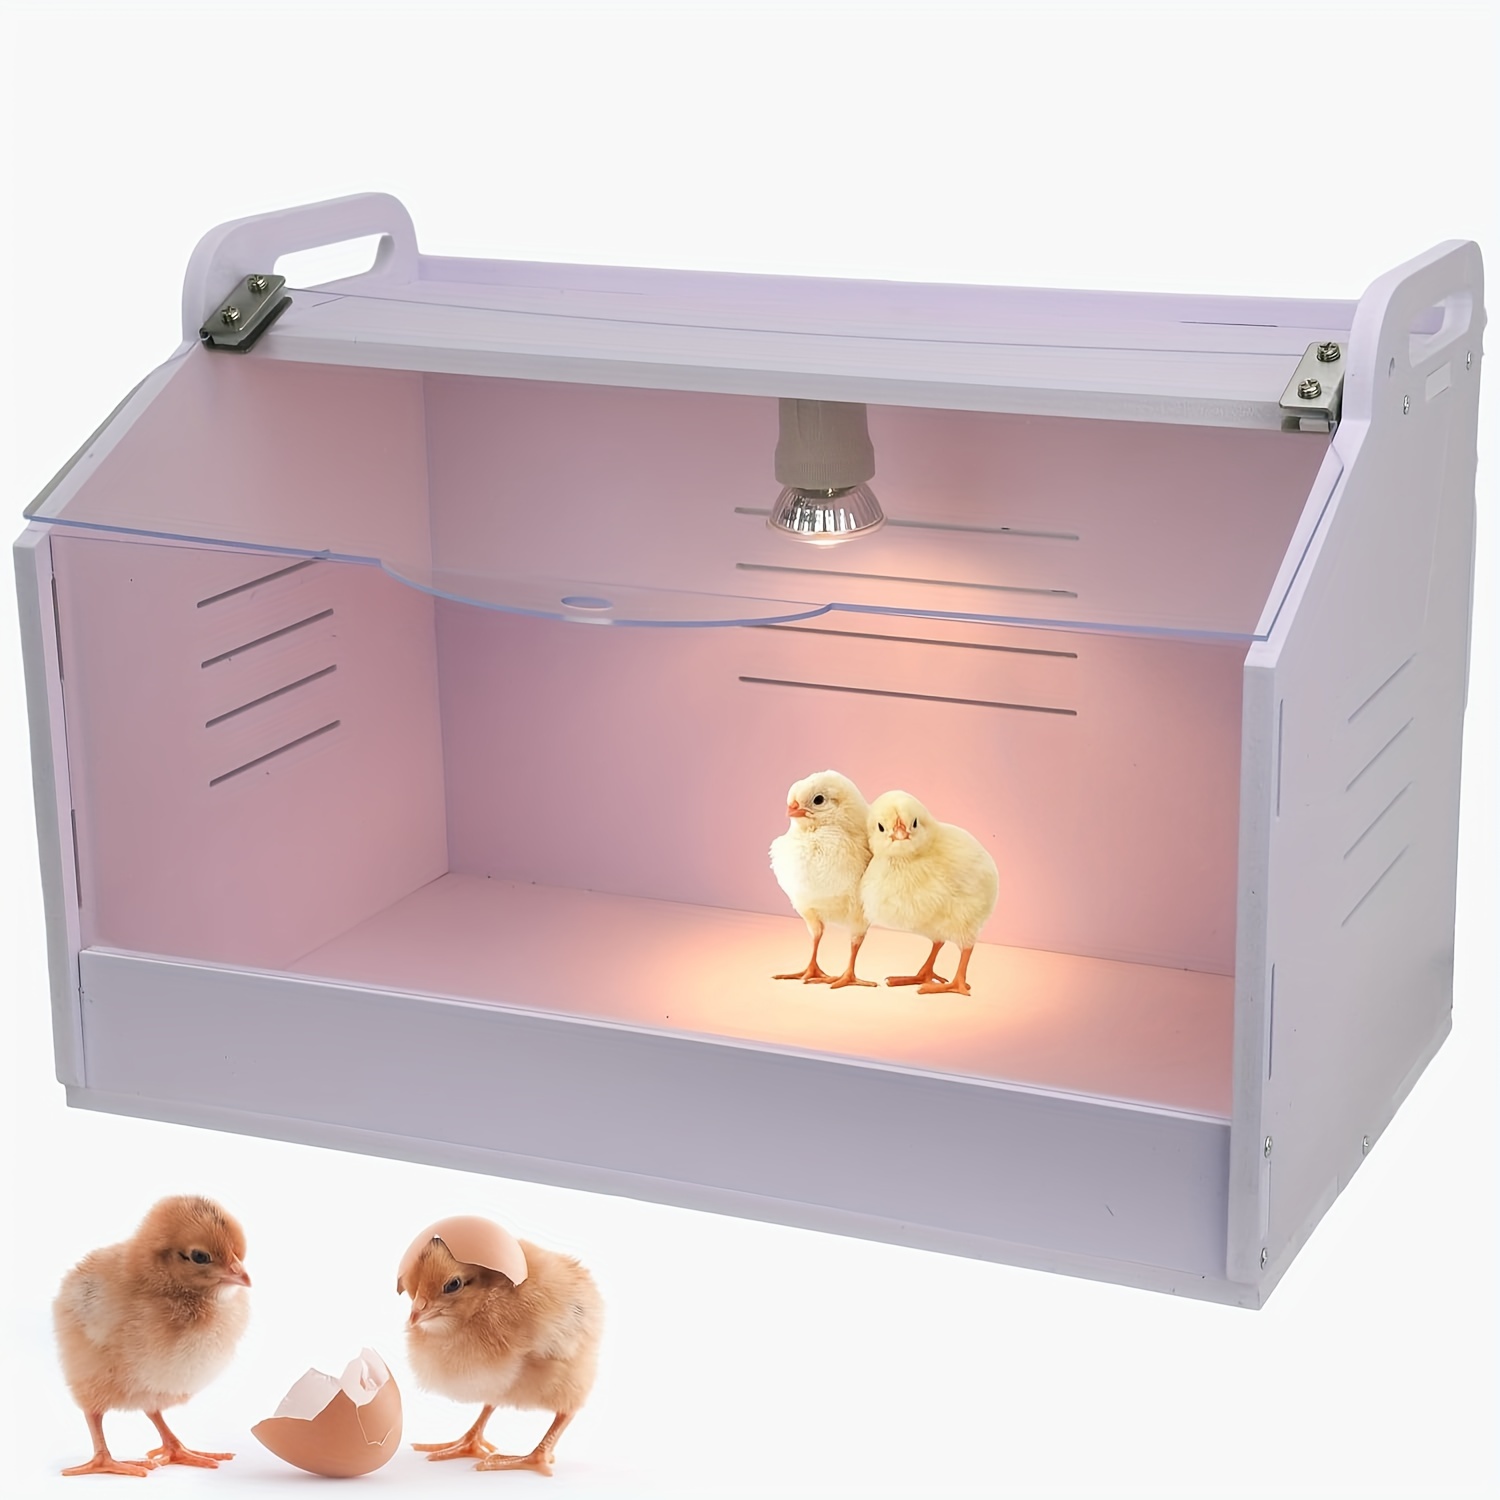 

Chicken , Chick Brooder With Heating Lamp, High Density Pvc Baby Chicken Cage Easy To Clean For Chicks Quail Birds Hold Up To 15